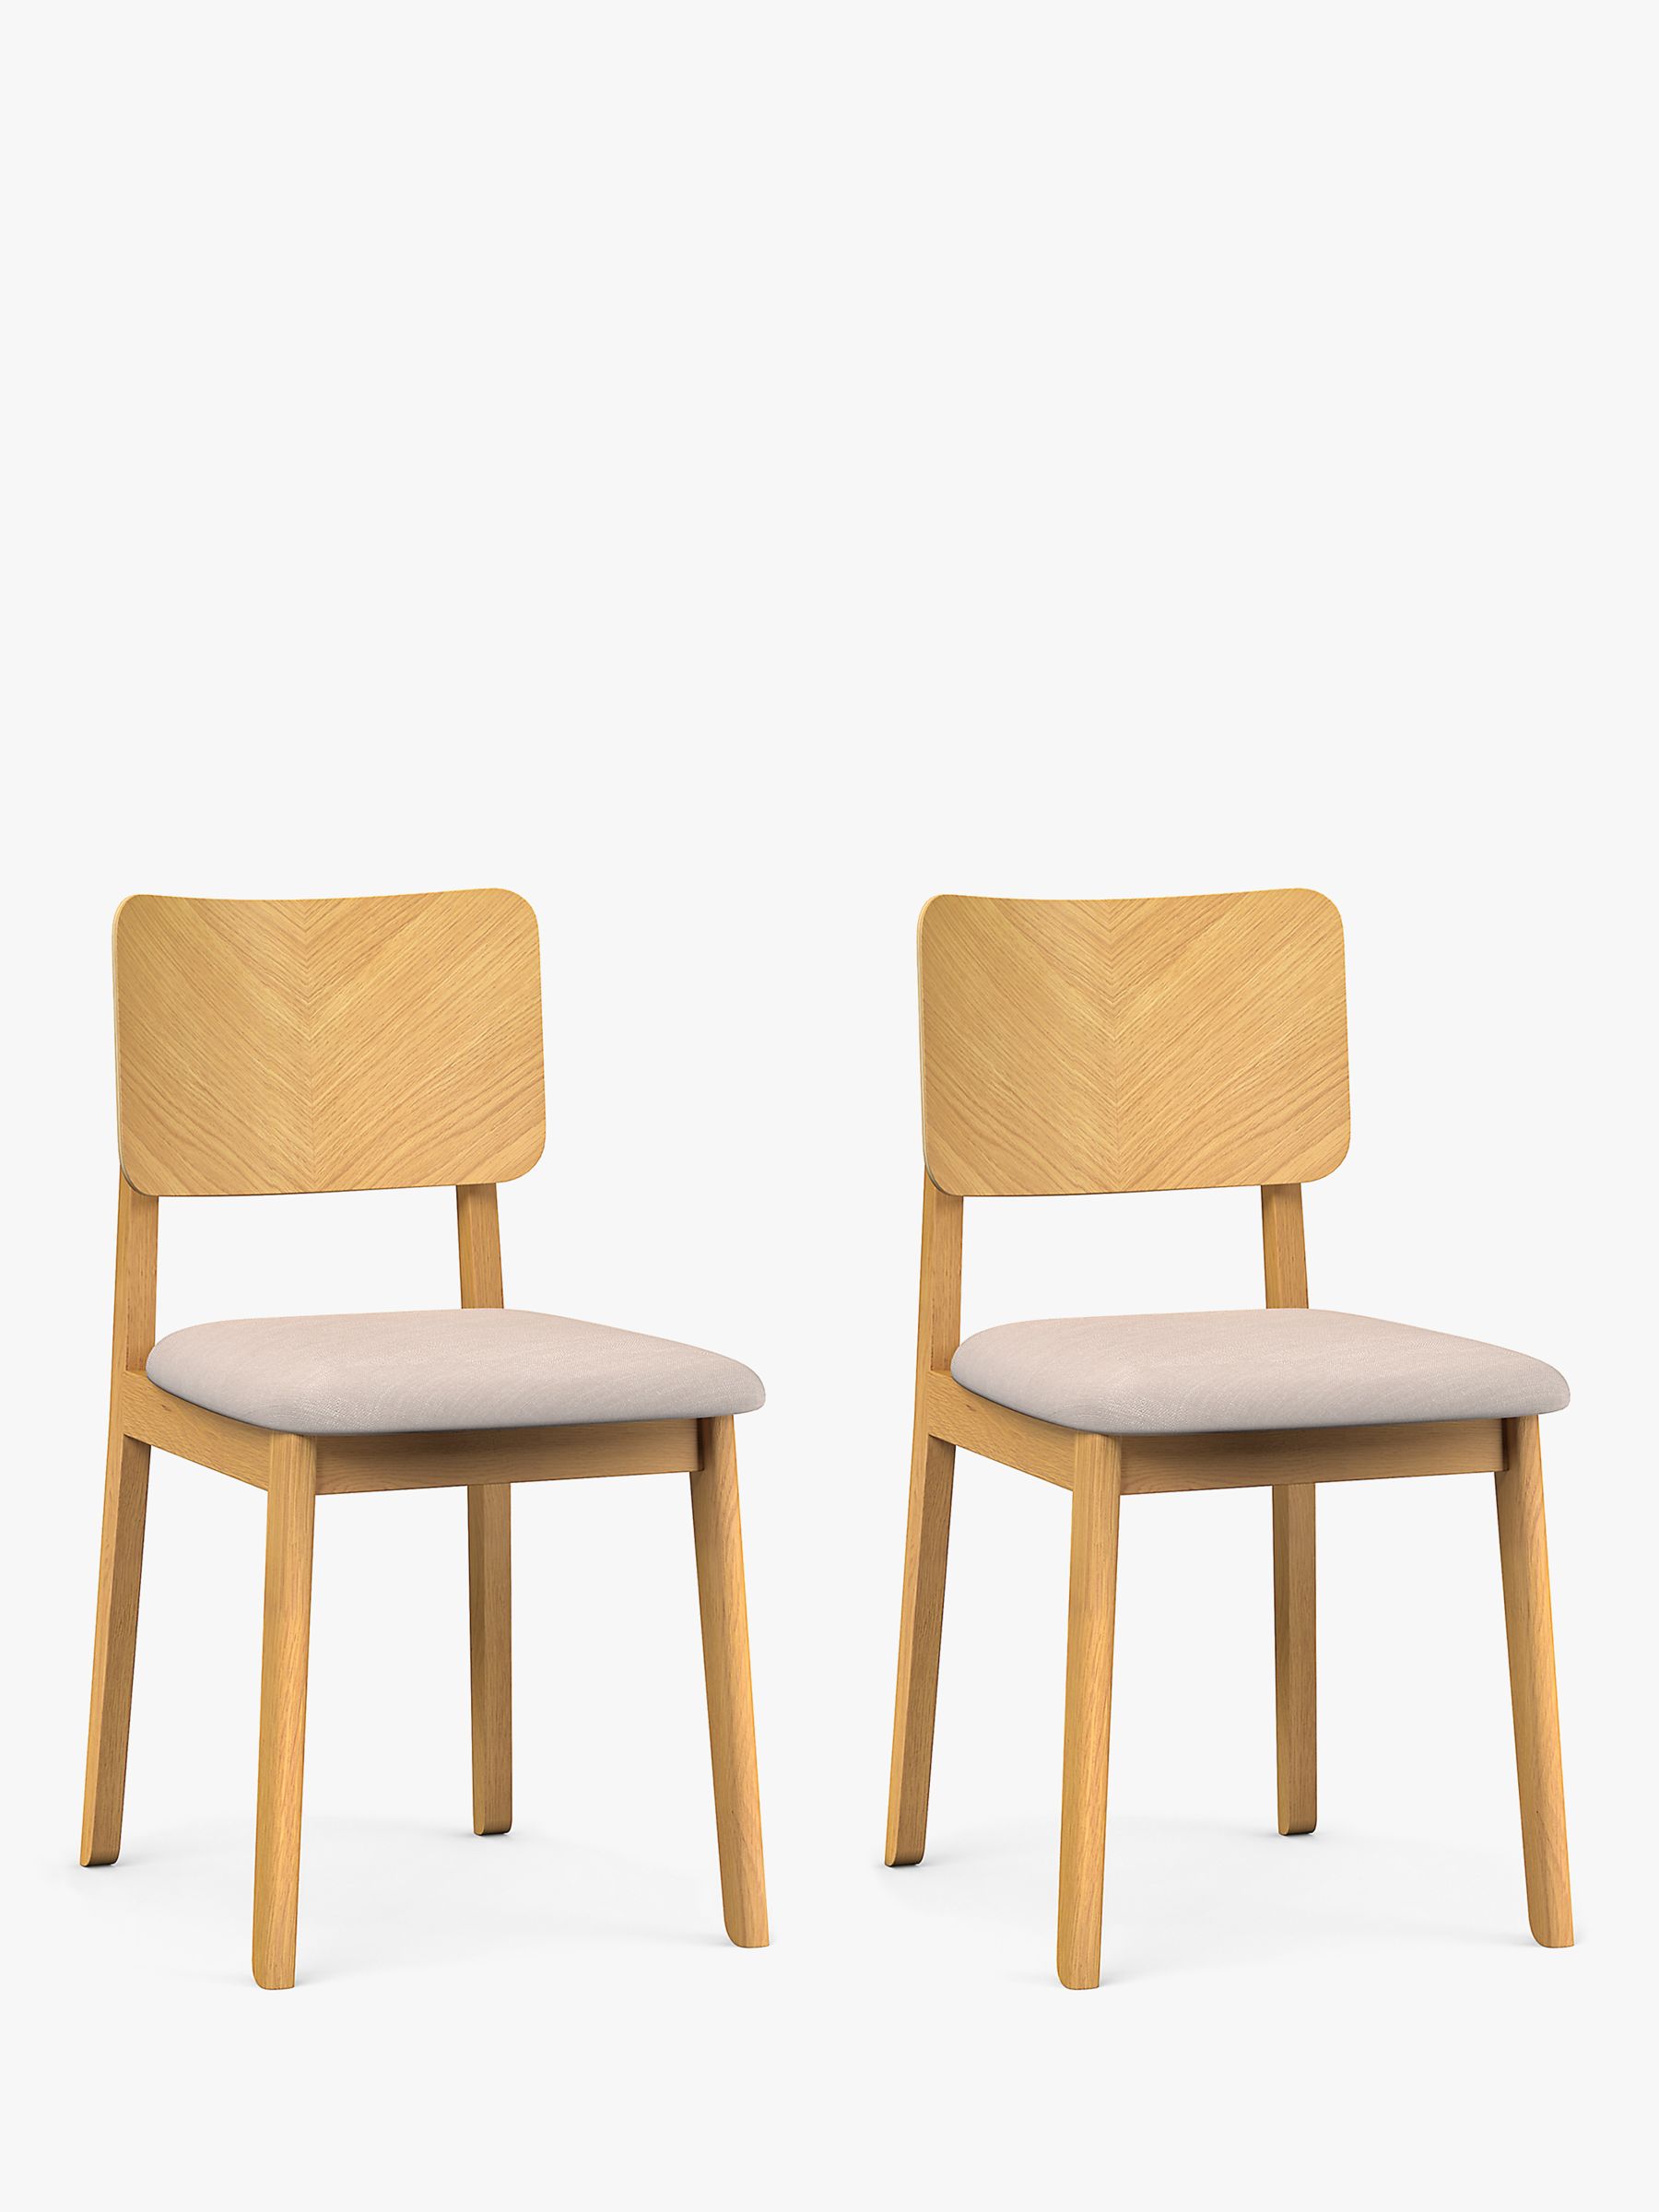 John Lewis ANYDAY Fern Dining Chairs, Set of 2, Oak